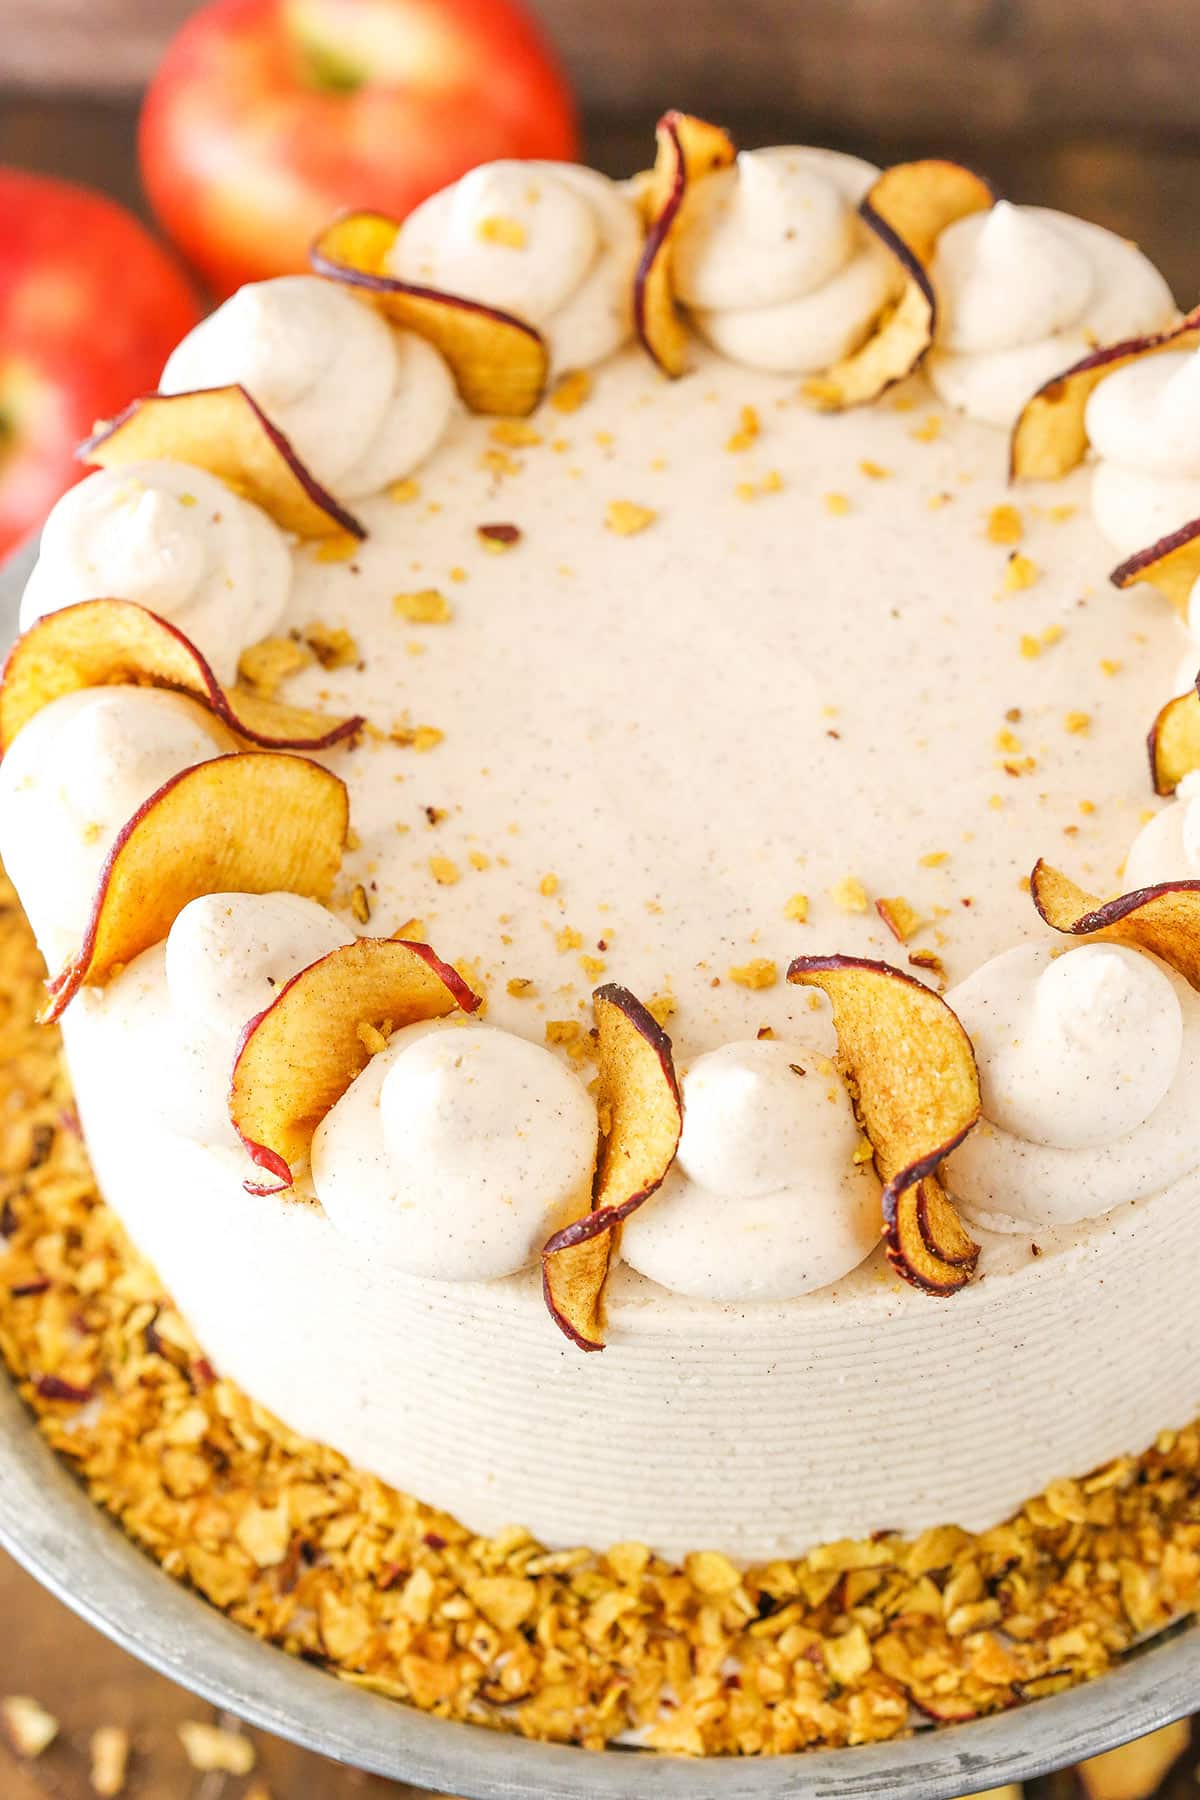 Overhead view of a full Cinnamon Apple Layer Cake on a gray cake stand